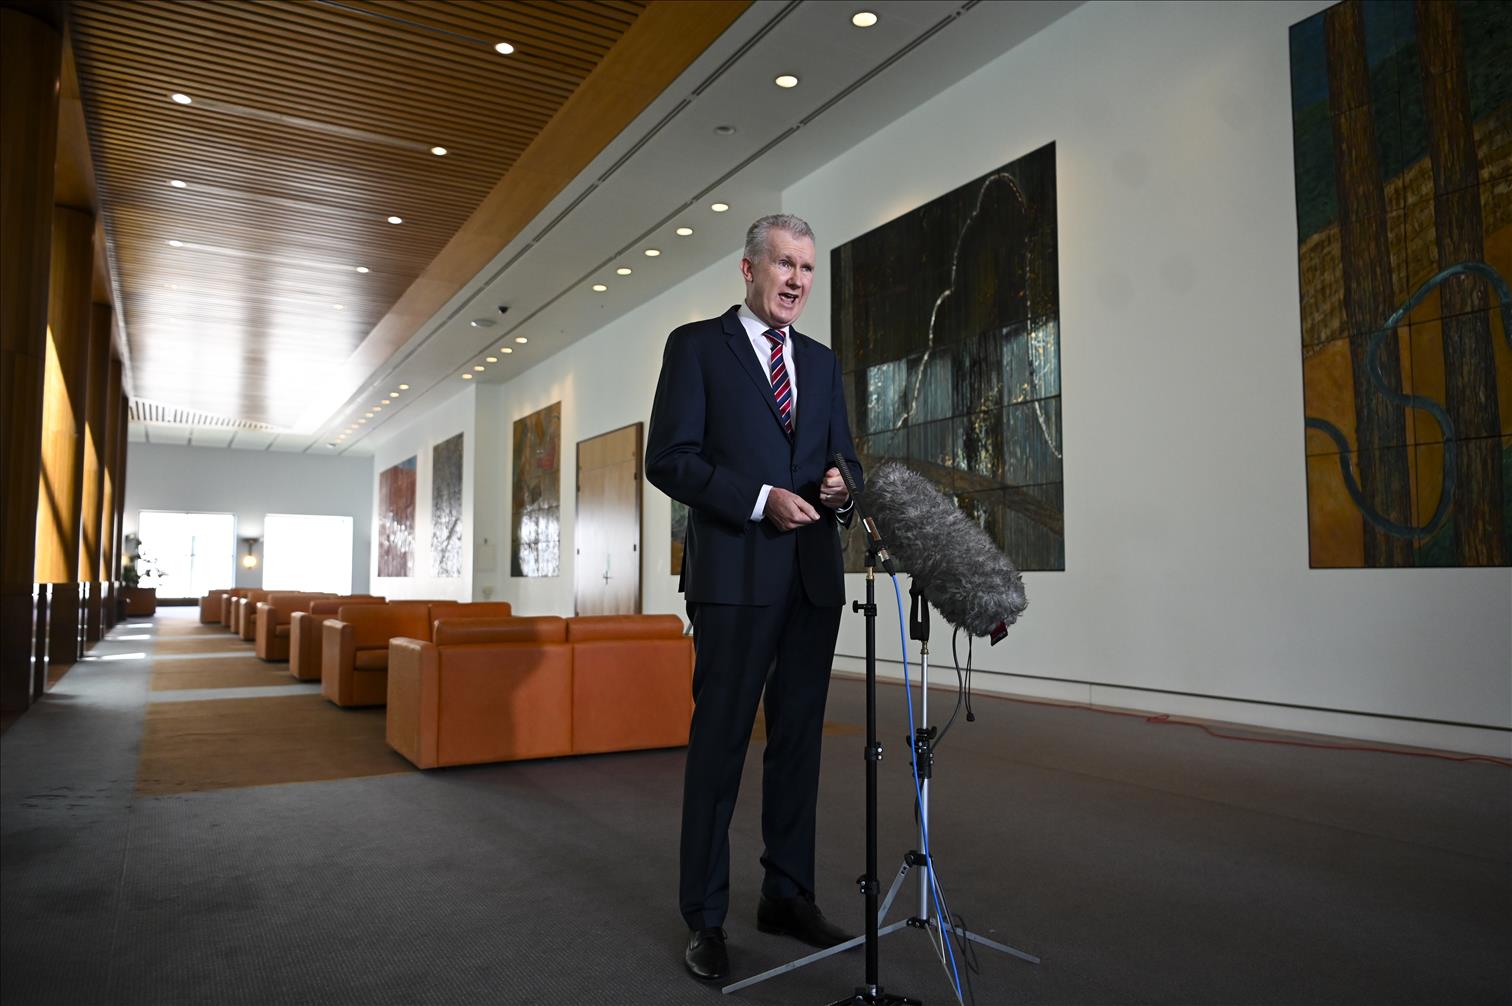 Tony Burke's Double Ministry Of Arts And Industrial Relations Could Be Just What The Arts Sector Needs